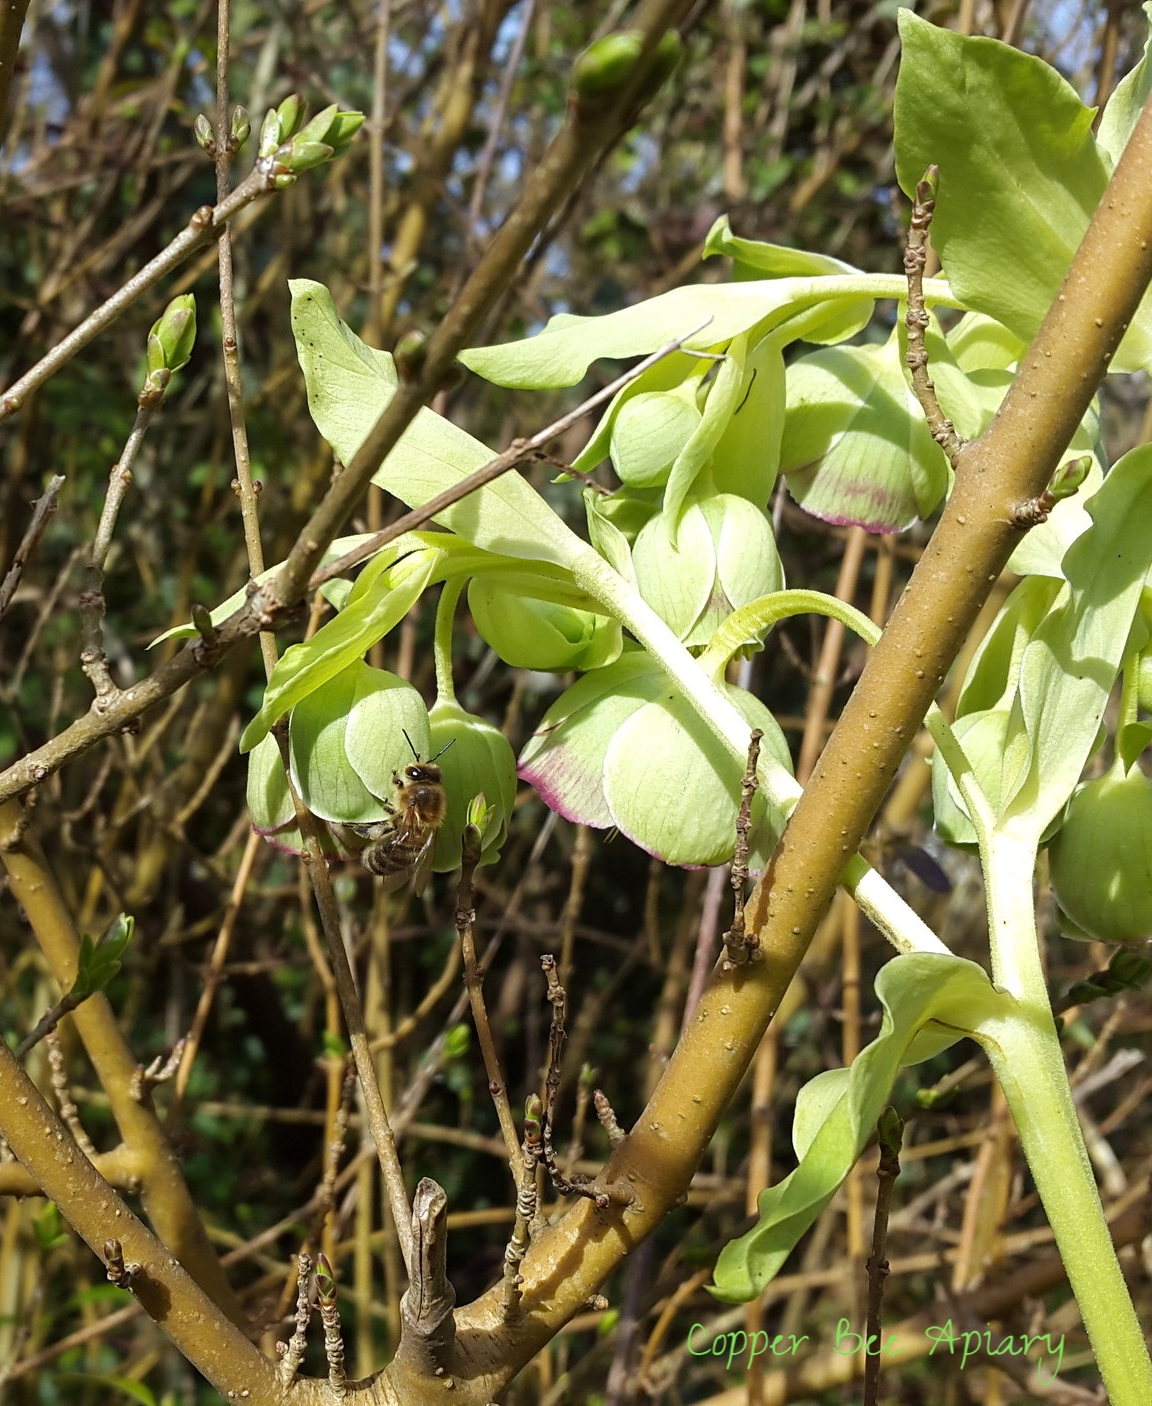 Forager on hellebore